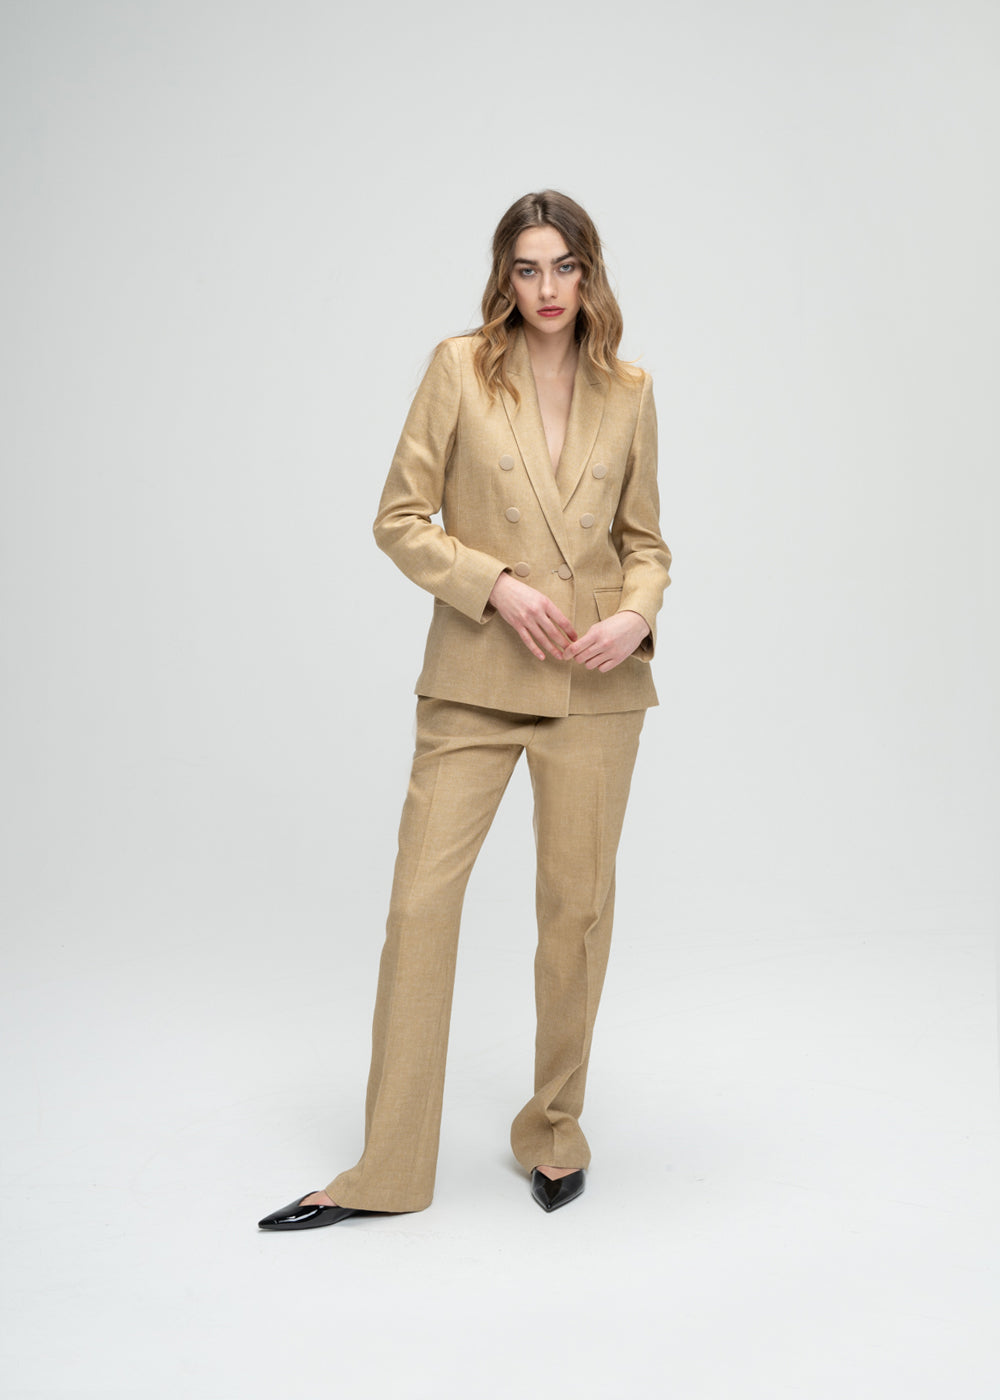 Beige fitted double-breasted suit jacket